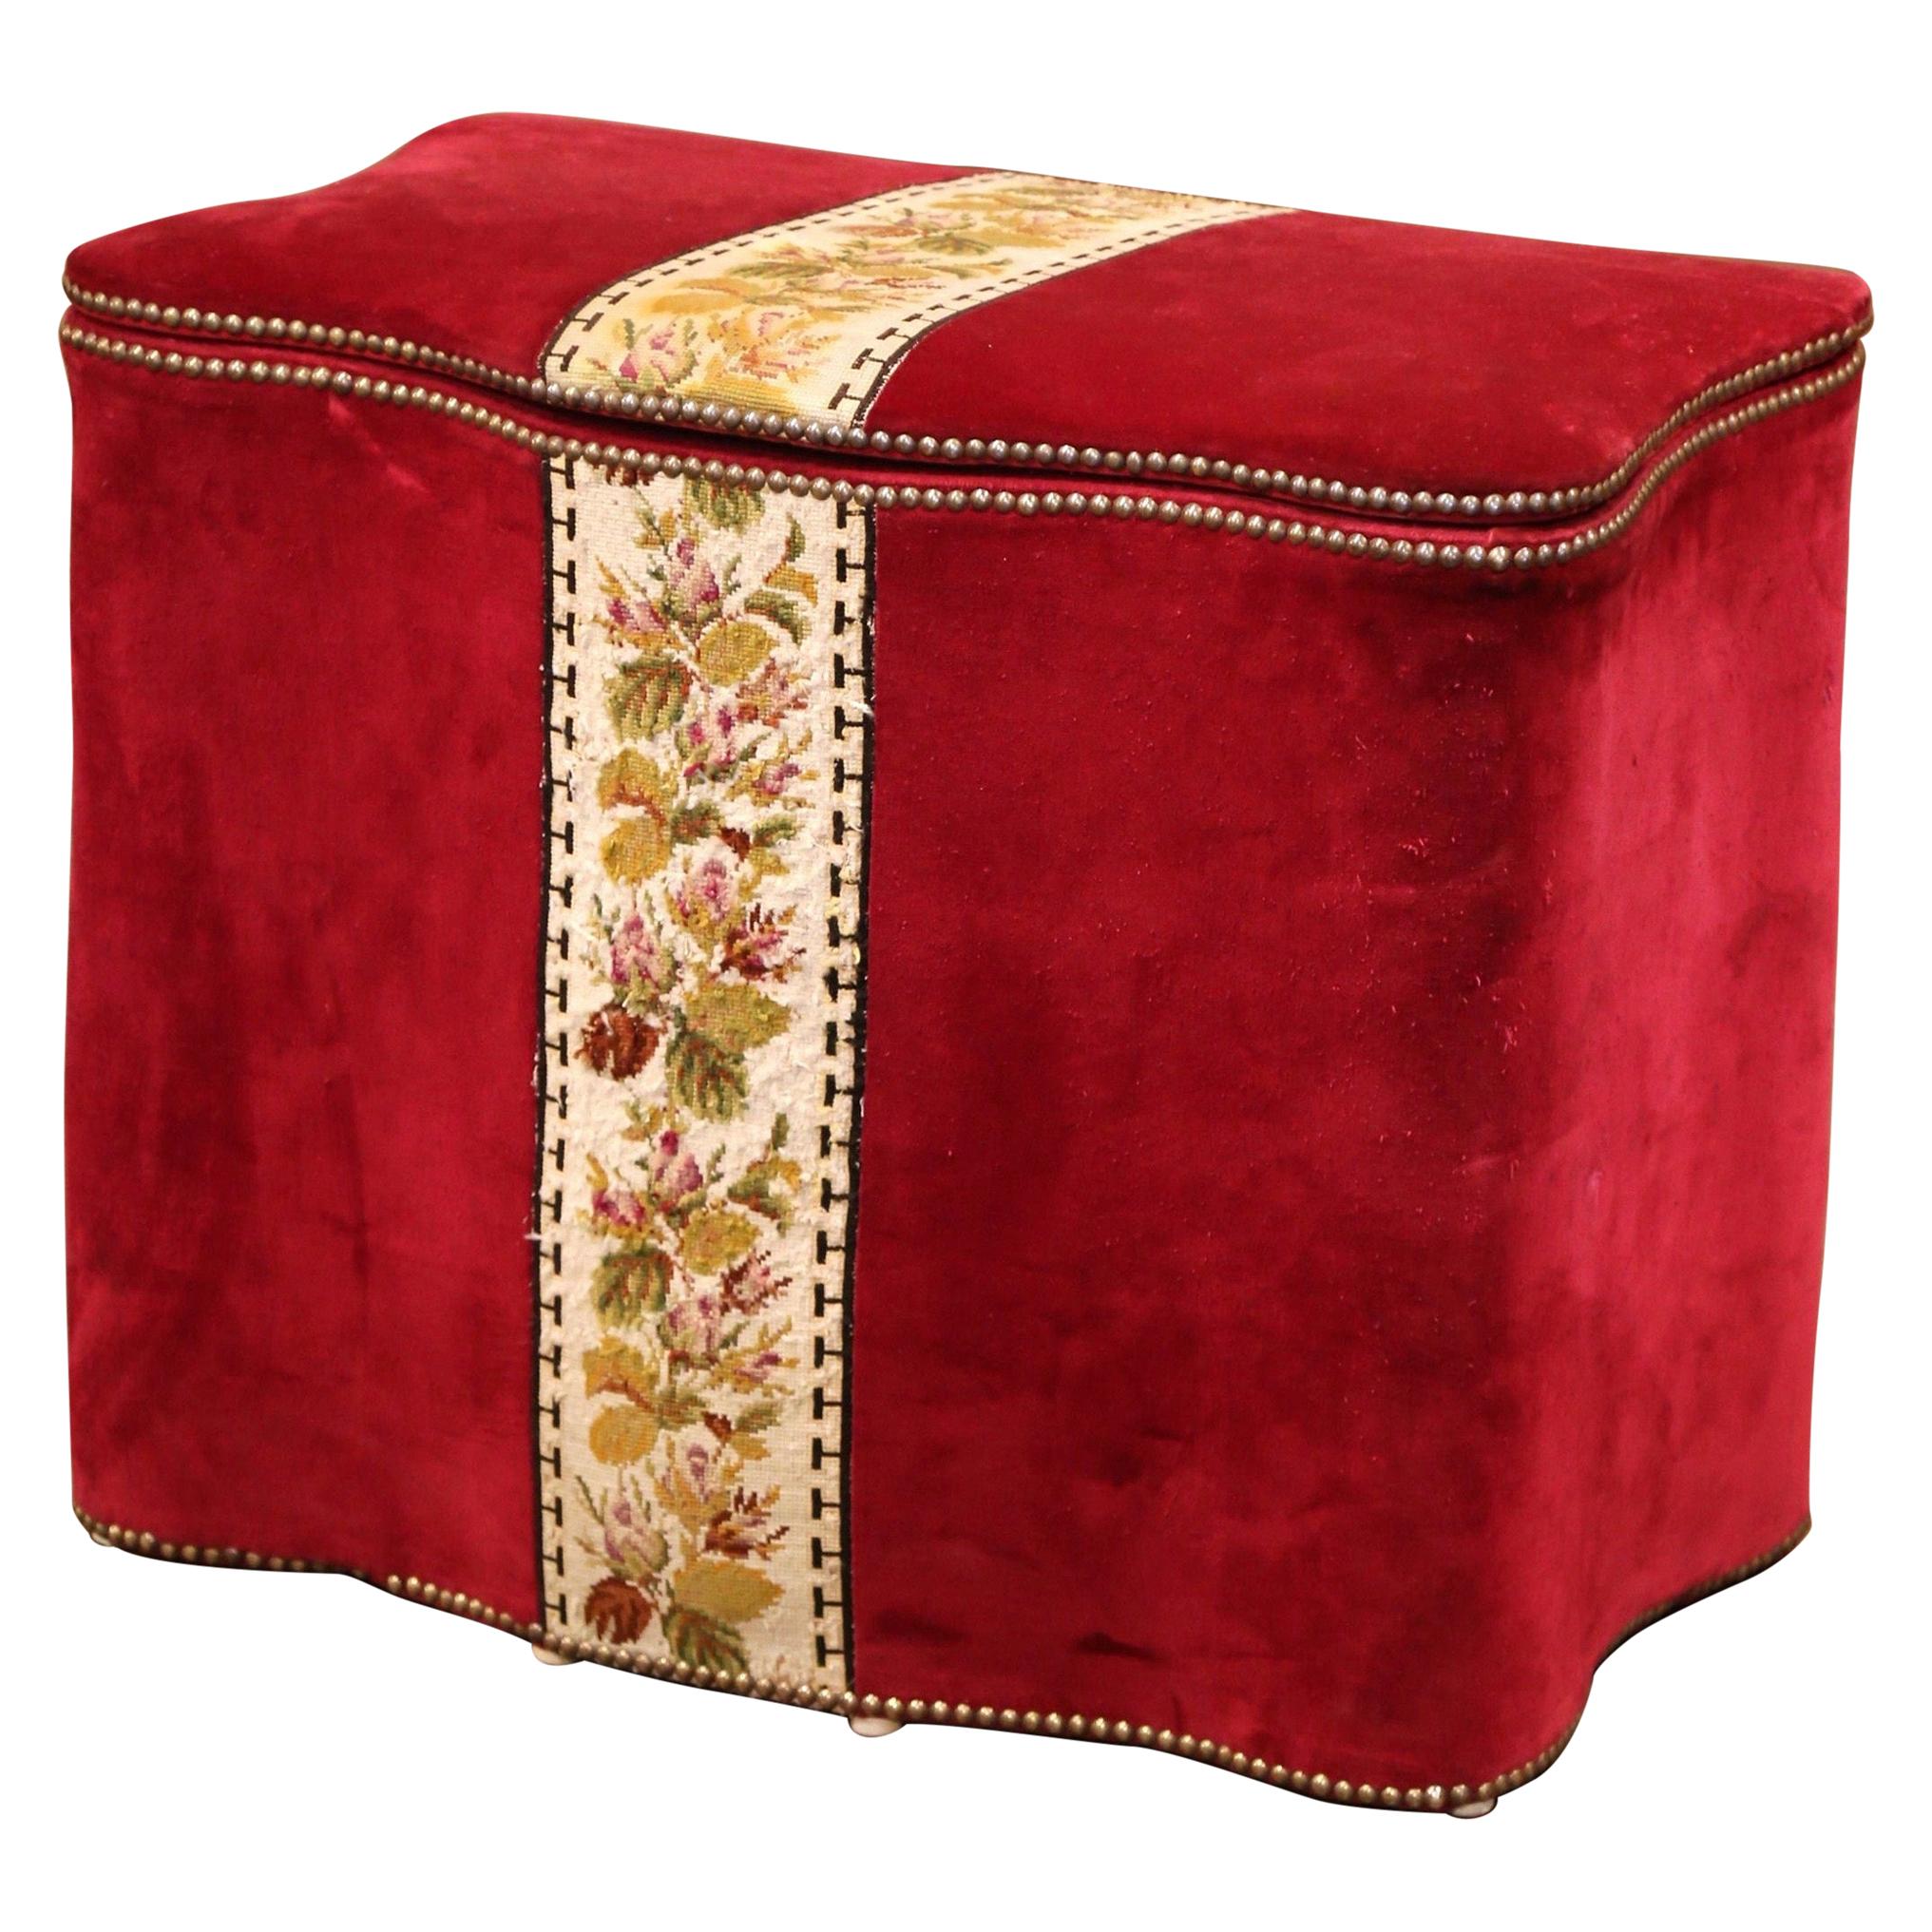 Early 20th Century French Needlepoint and Velvet Storage Hamper Trunk